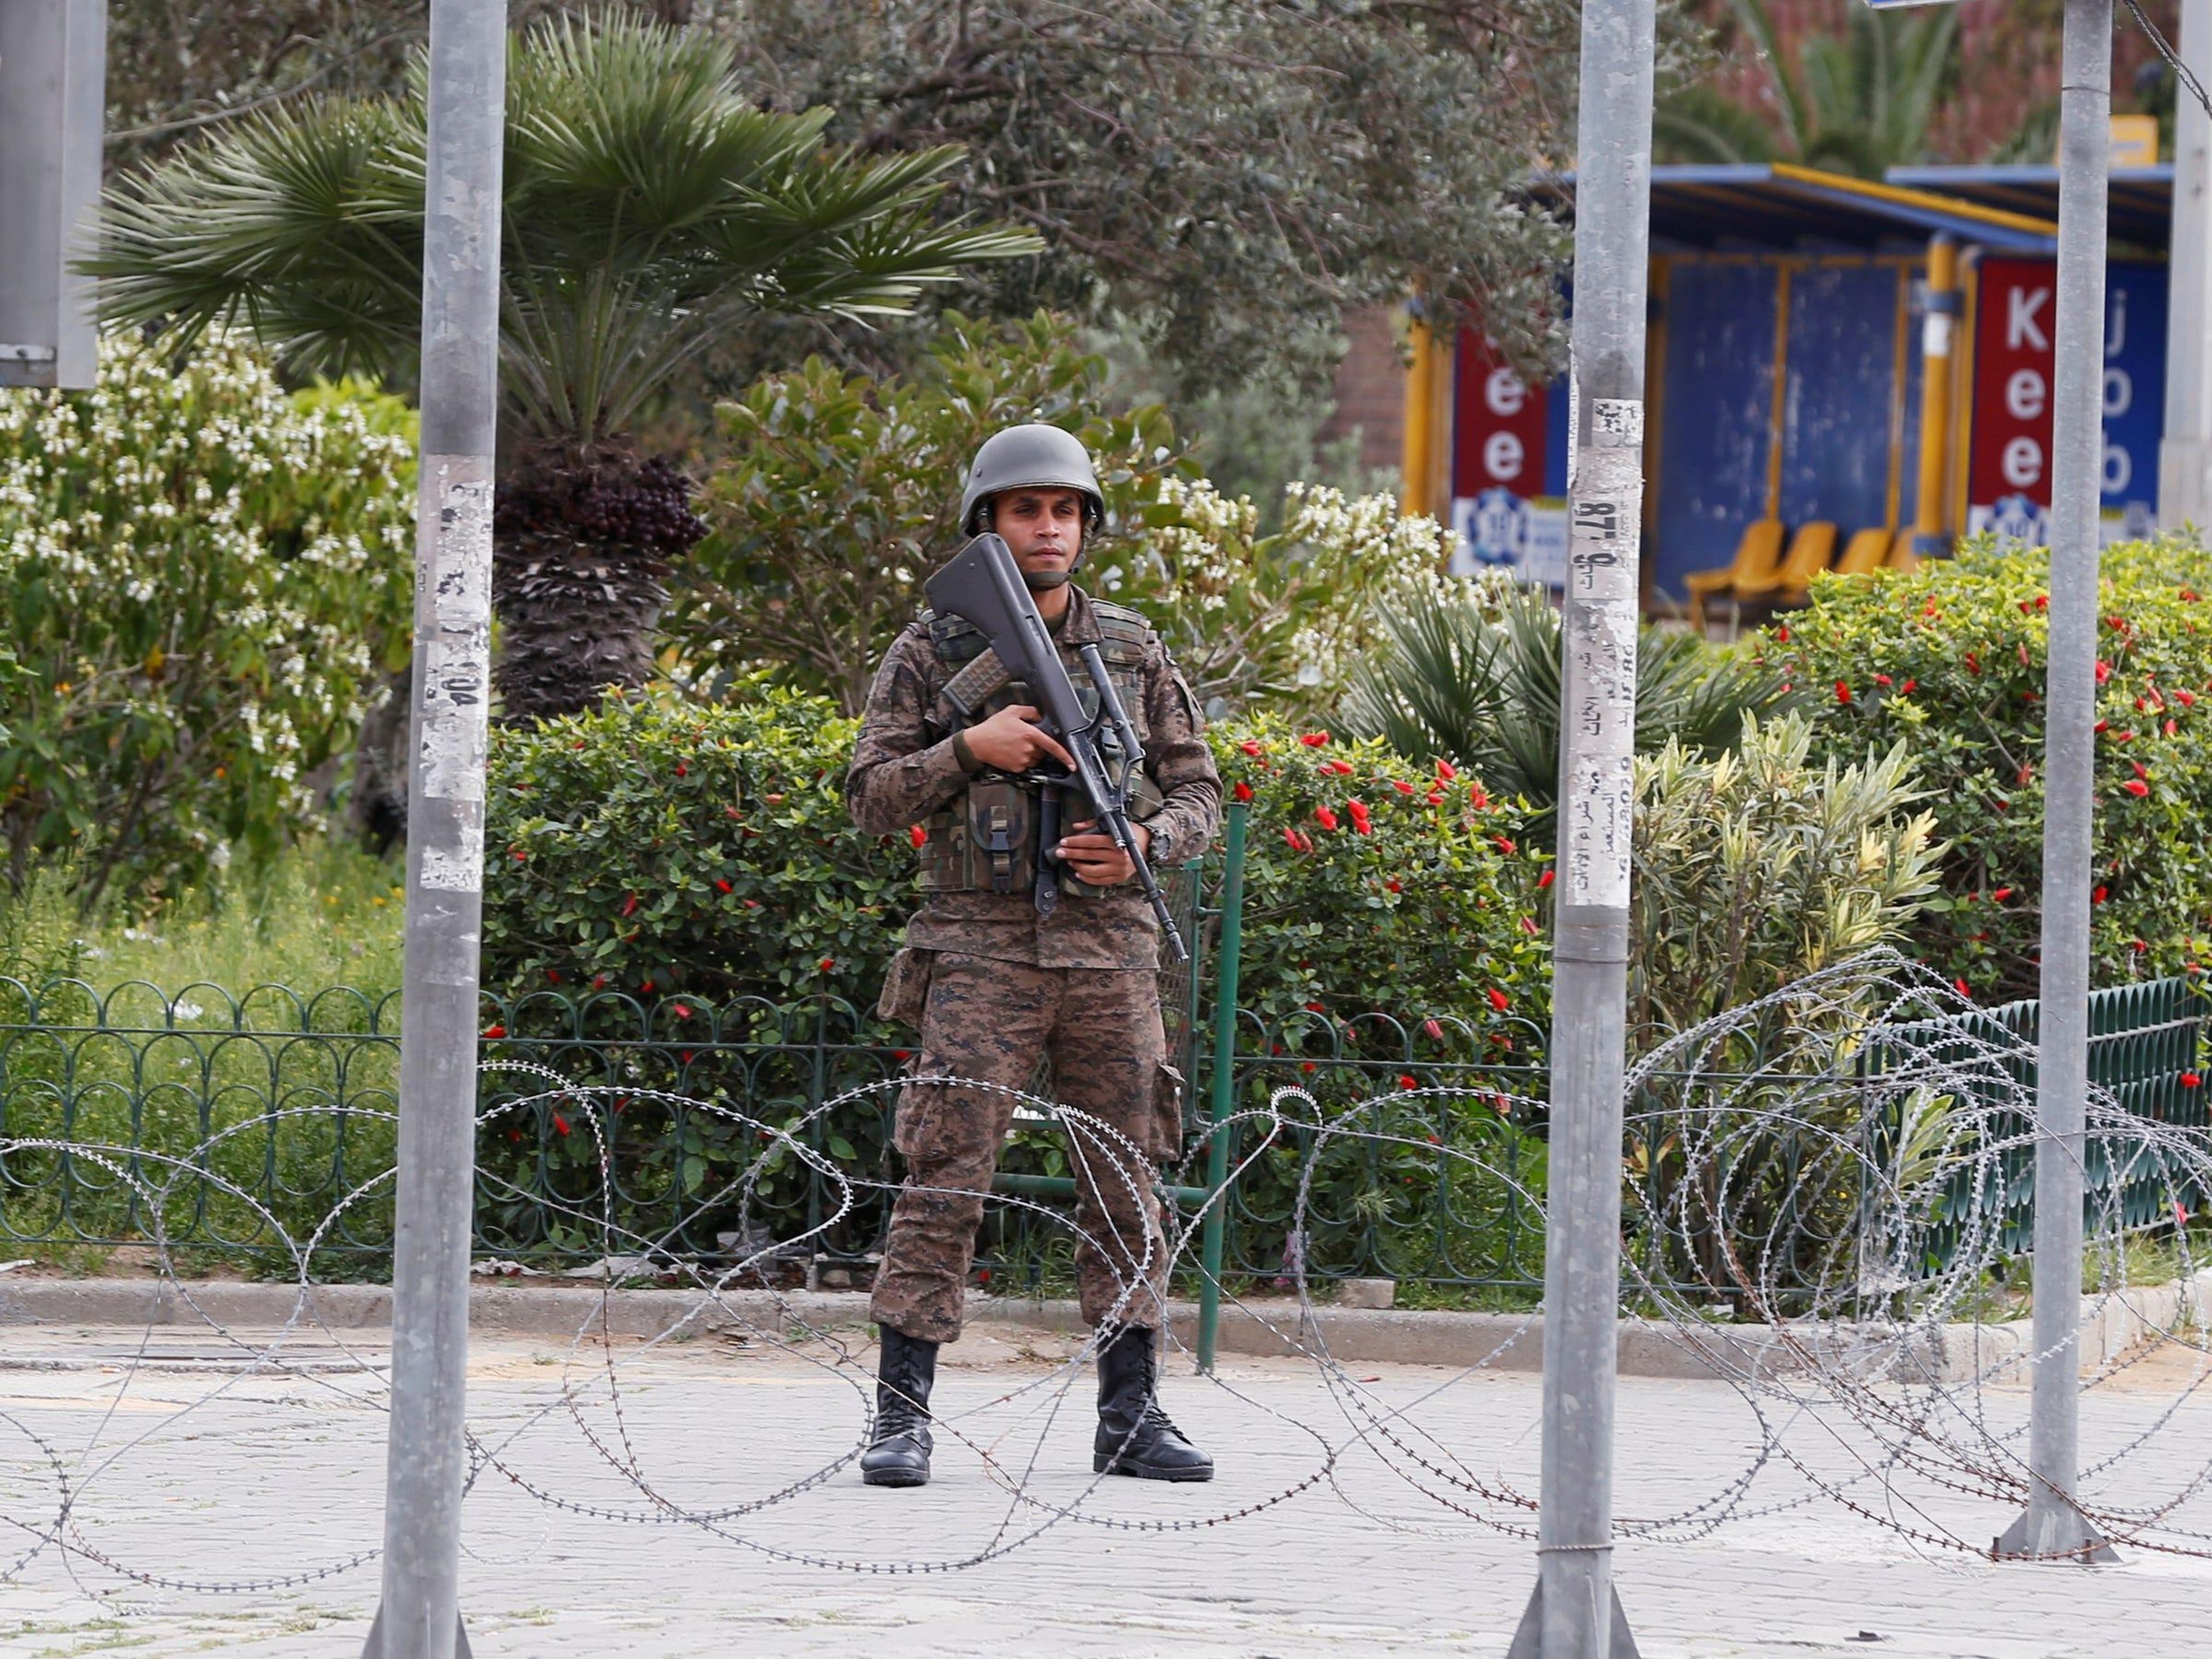 A soldier stands in downtown Tunis on March 24, after Tunisia's president ordered the army to patrol the streets and enforce lockdowns to stop the spread of coronavirus.